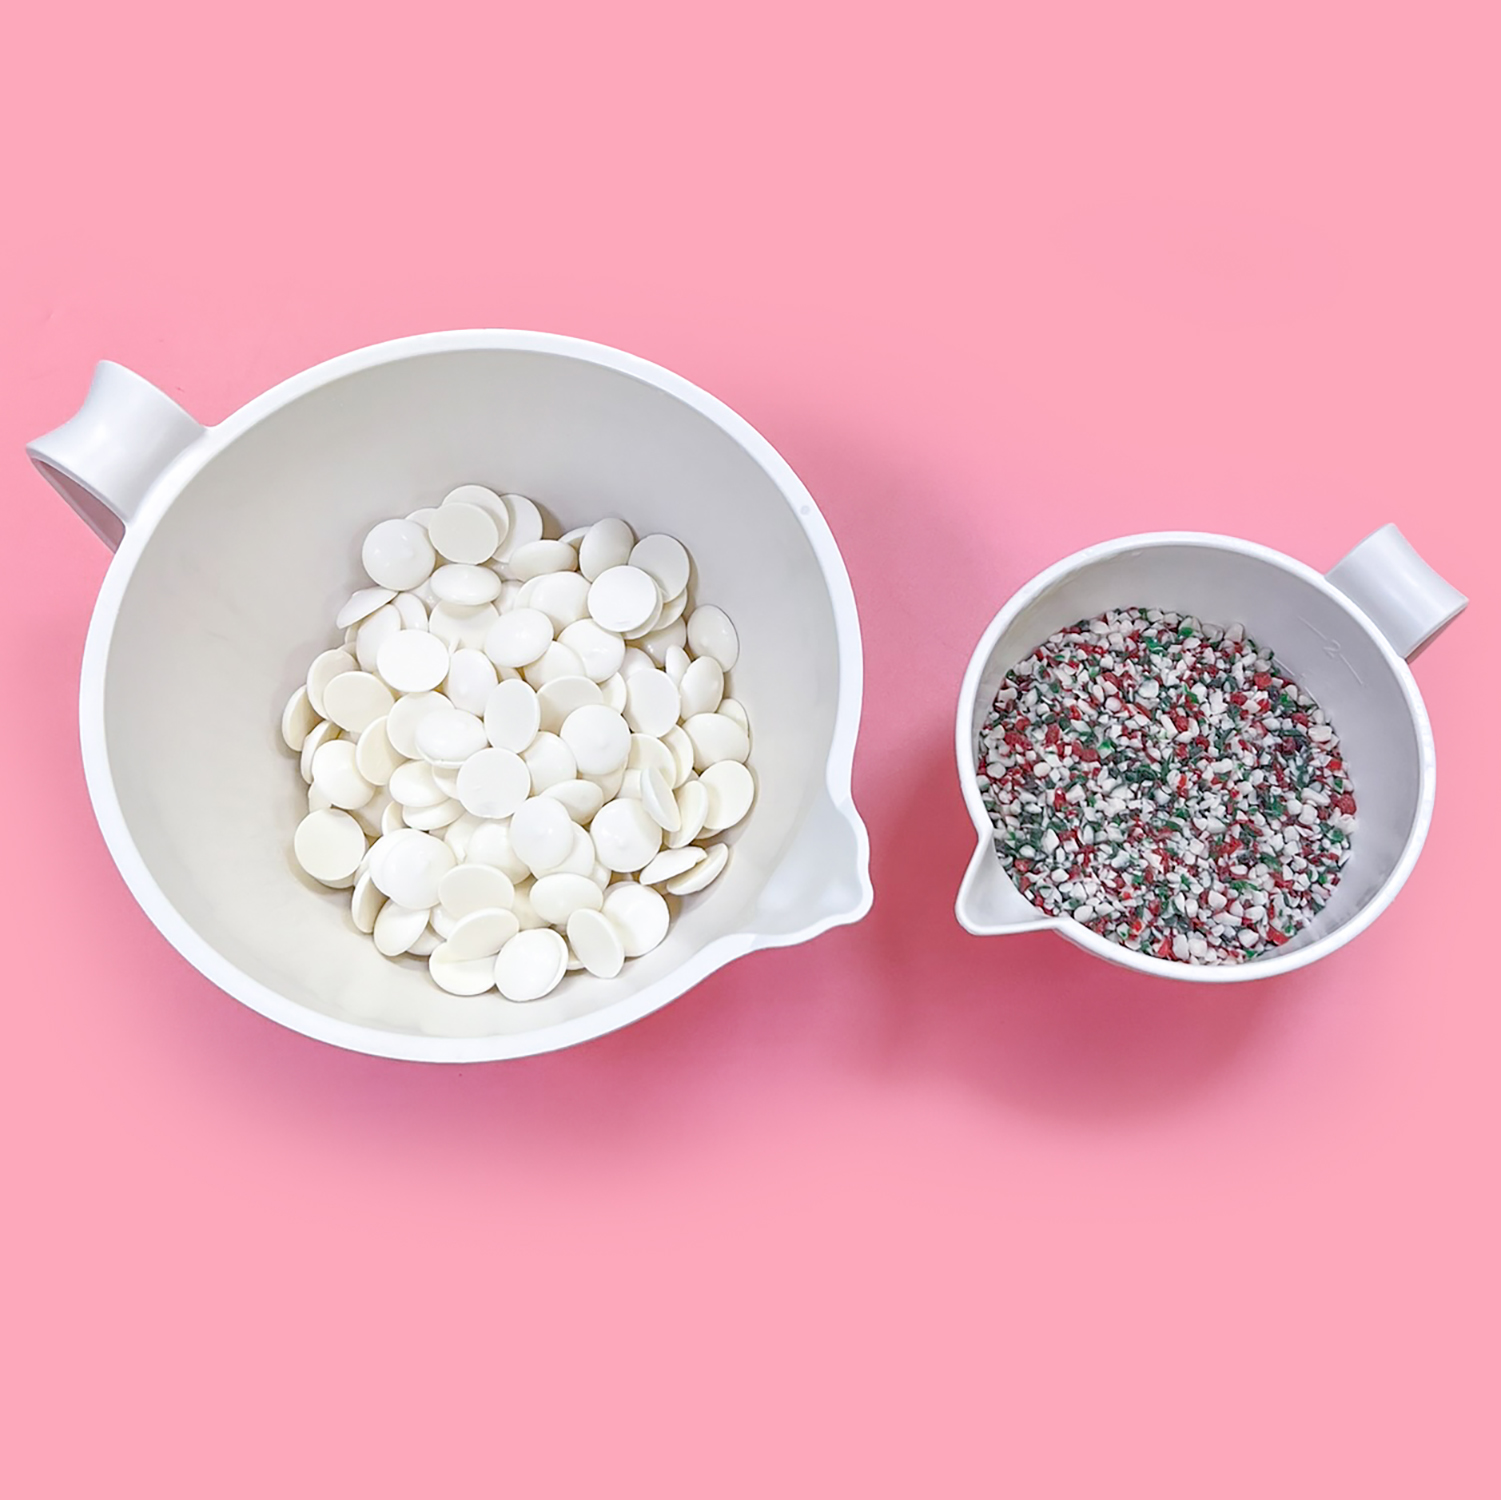 bowl of white candy melts and bowl of peppermint crunch